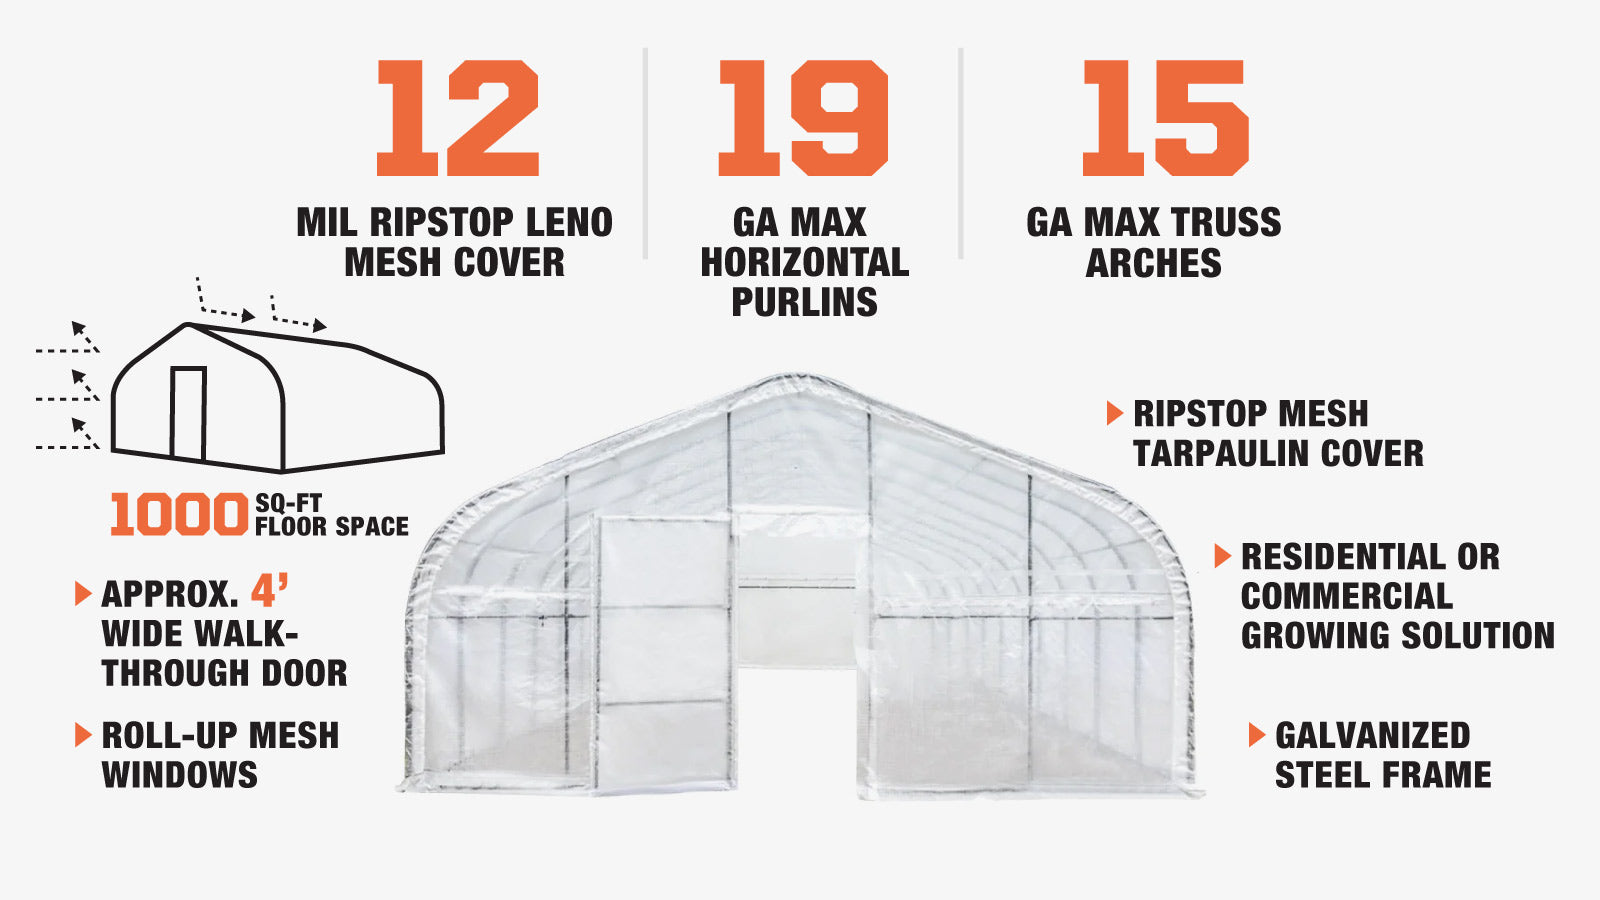 TMG Industrial 20’ x 50’ Tunnel Greenhouse Grow Tent w/12 Mil Ripstop Leno Mesh Cover, Cold Frame, Roll-up Windows, Peak Ceiling Roof, TMG-GH2050-description-image